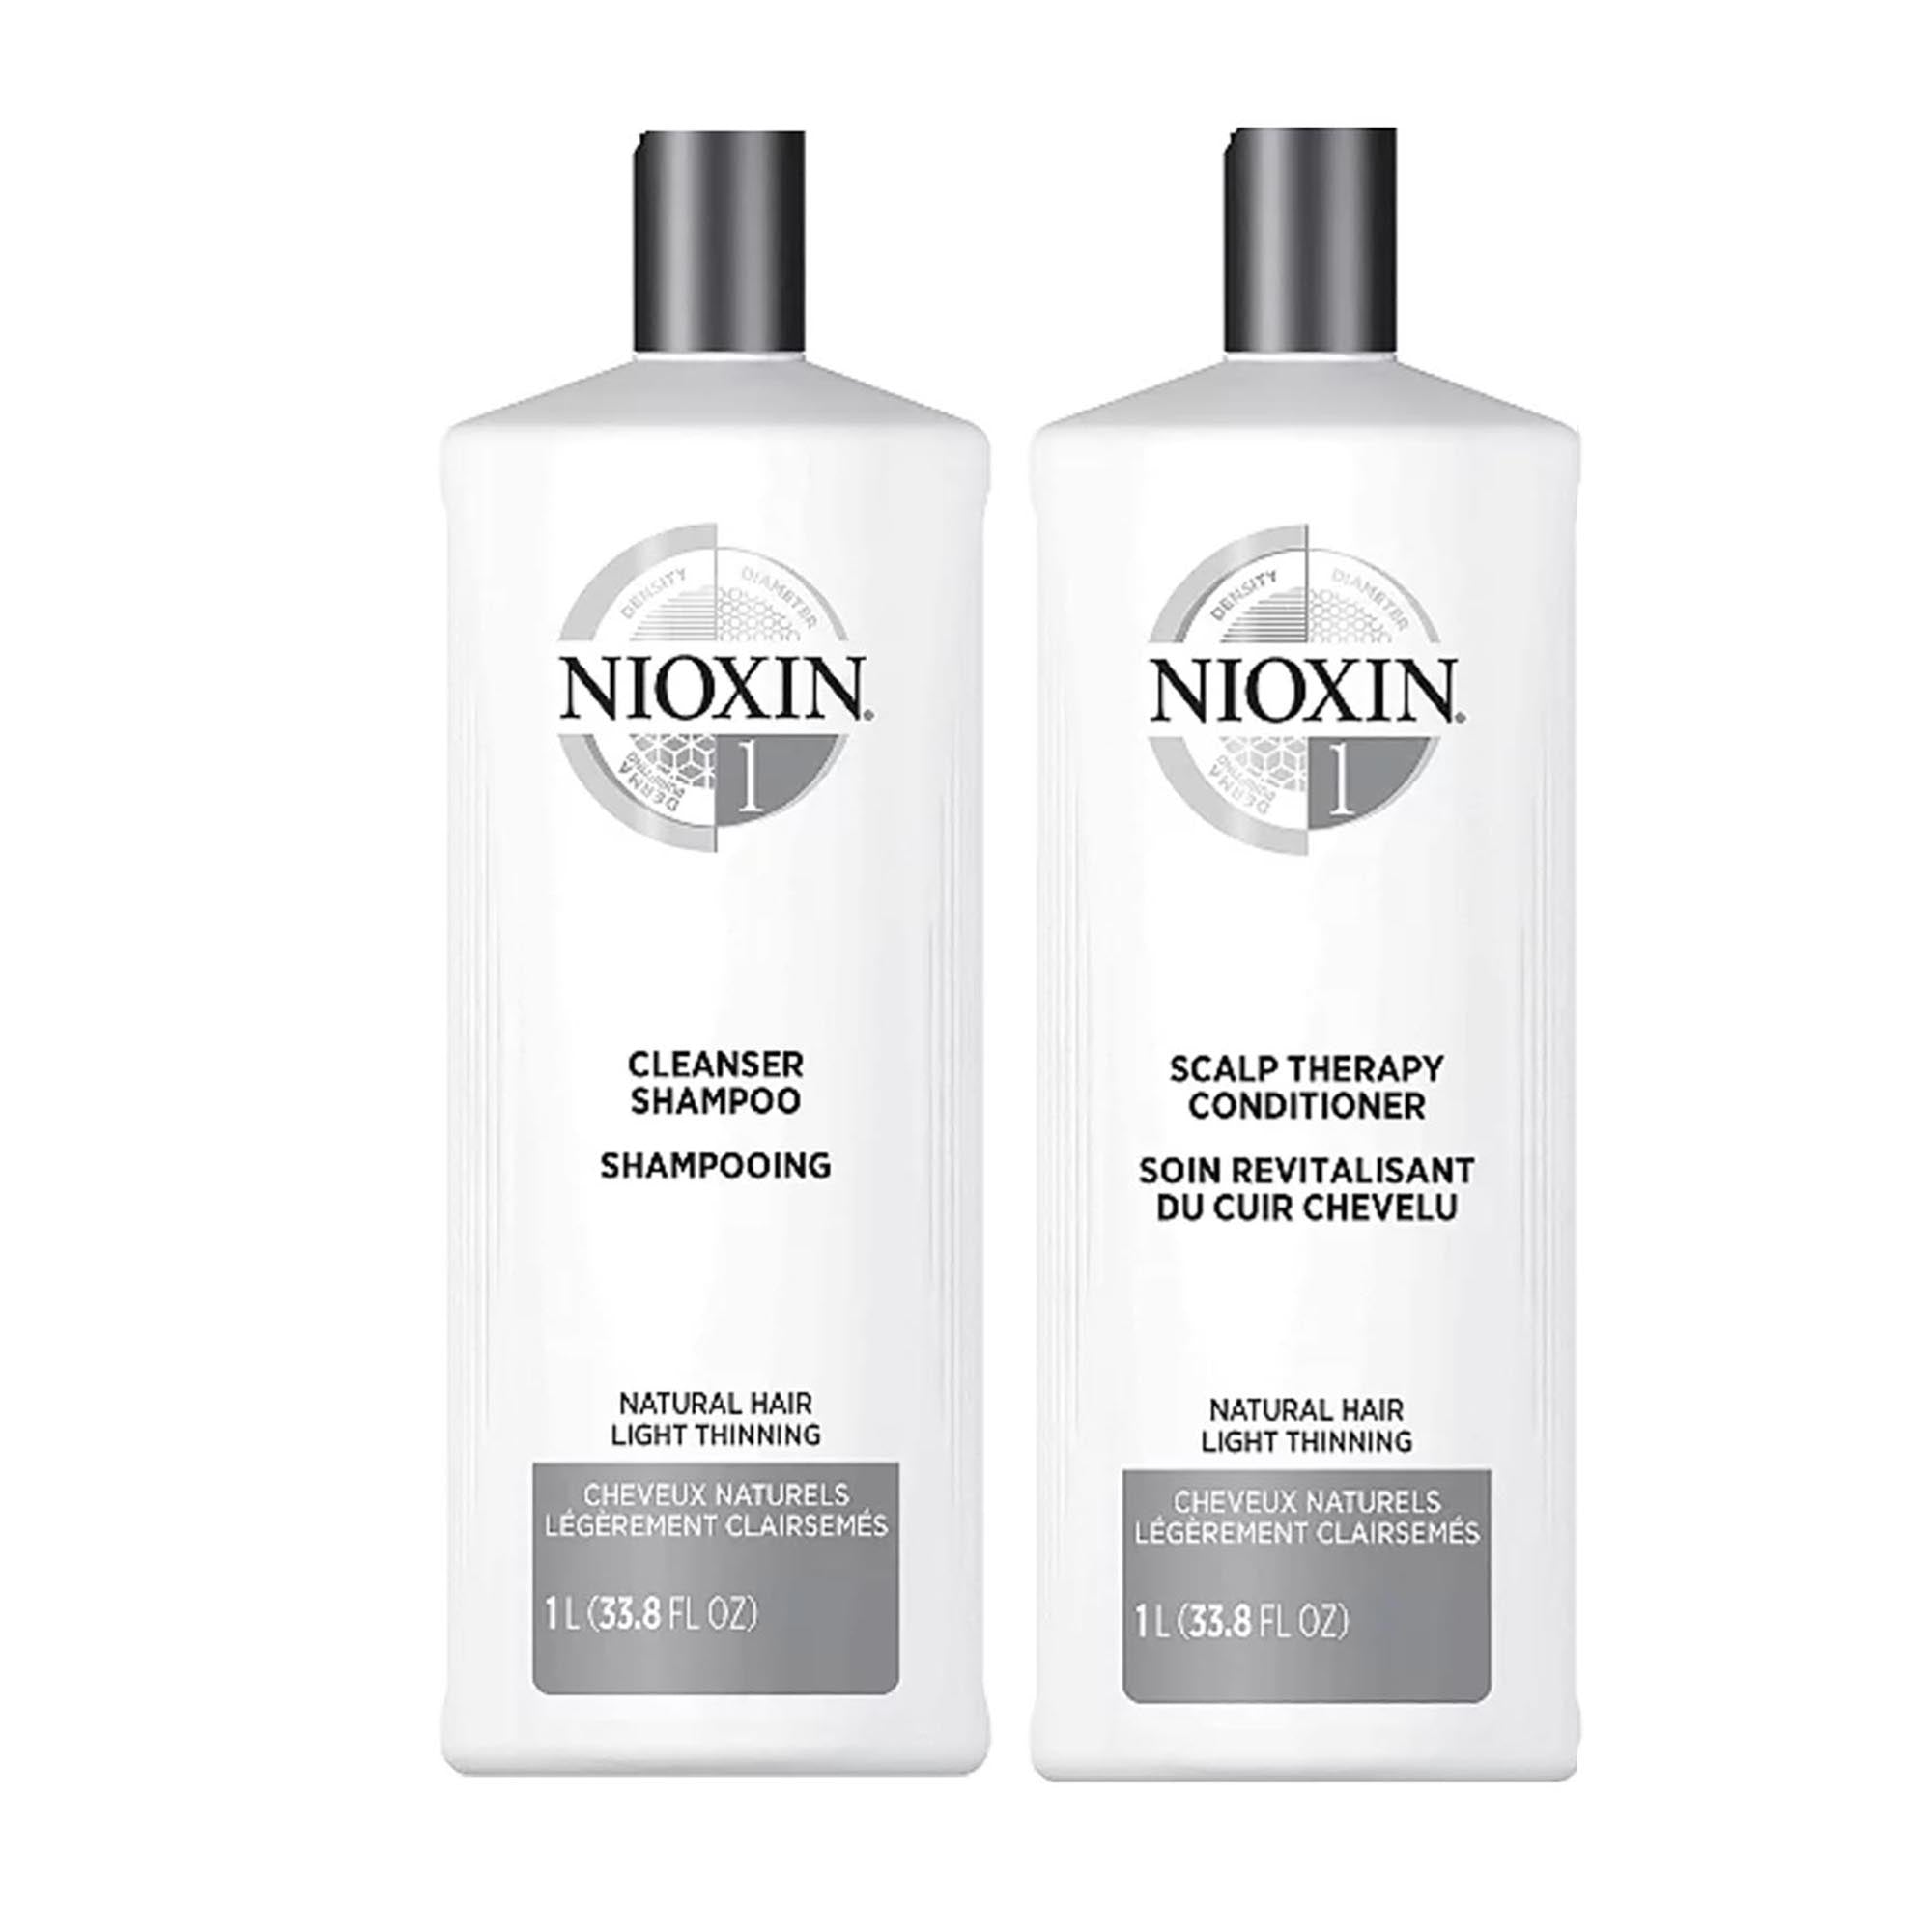 Nioxin System 1 Cleanser Shampoo & Scalp Therapy Conditioner Bundle ($104 Value) / 33.OZ